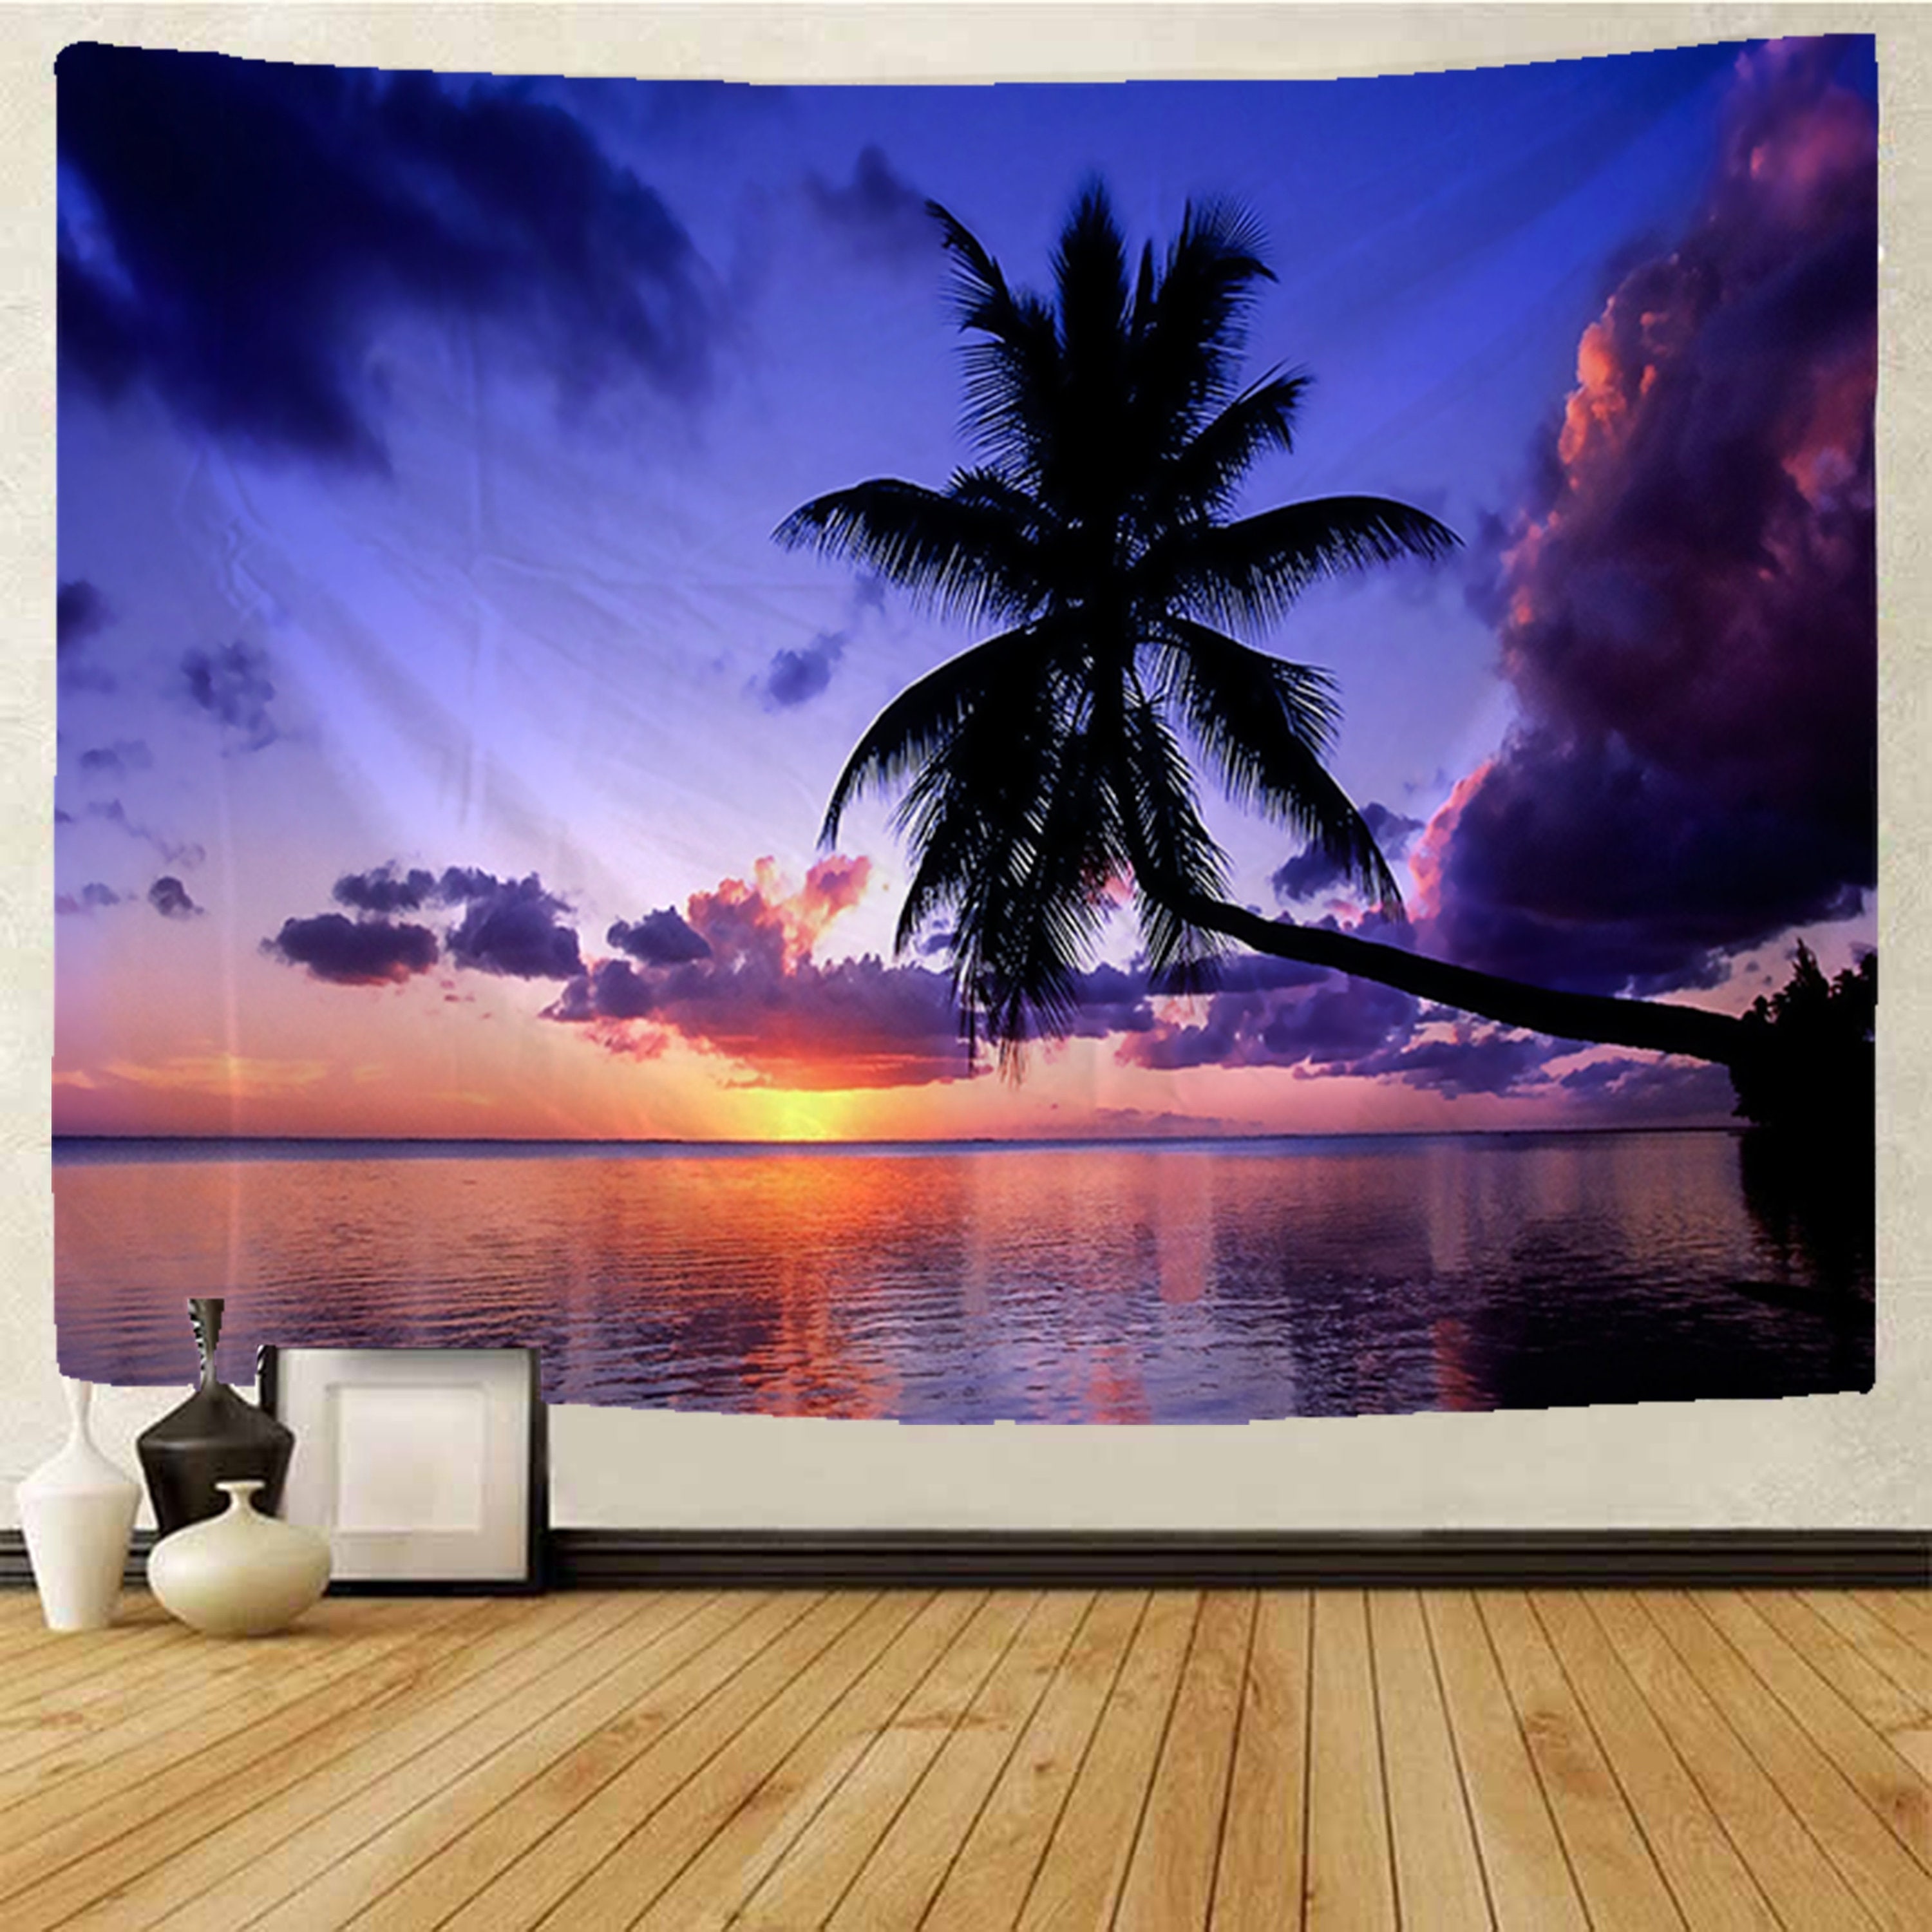 Sunset Sea Beach Palm Tree Scenery Tapestry Wall Hanging for Living Room Bedroom 